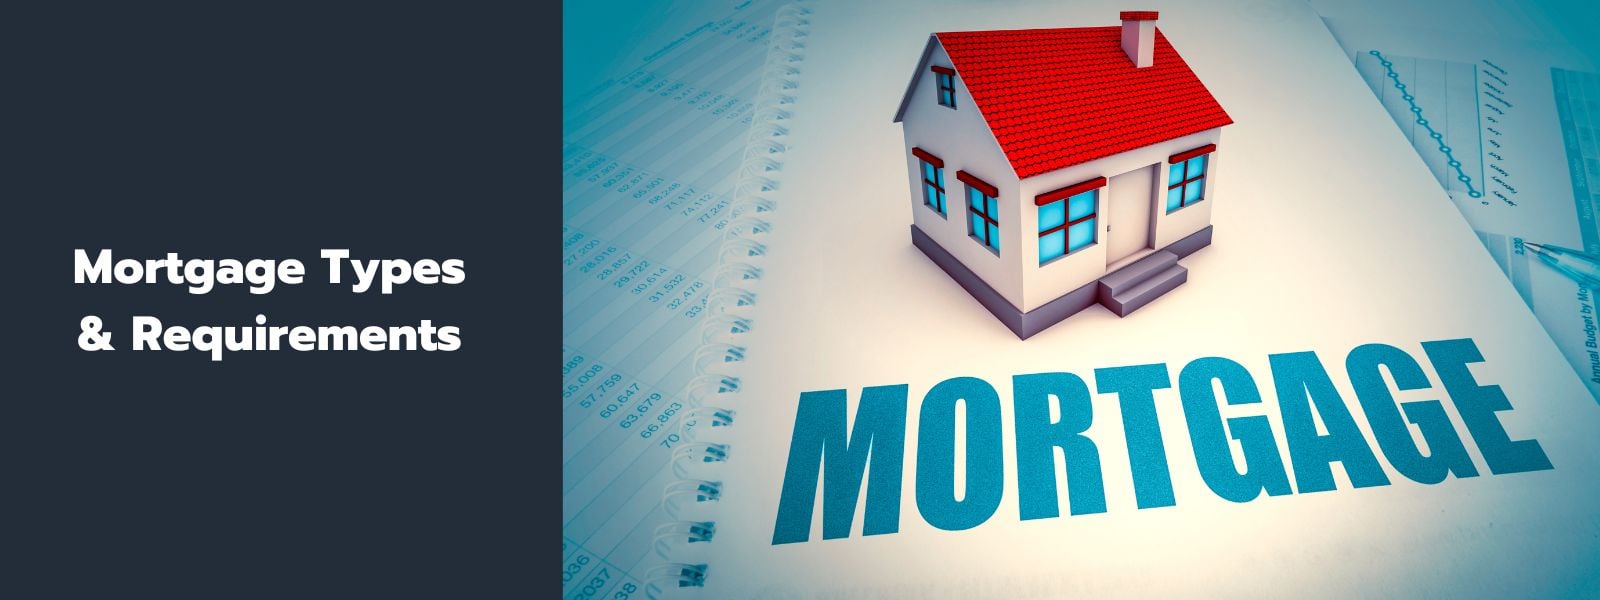 Mortgage Types & Requirements